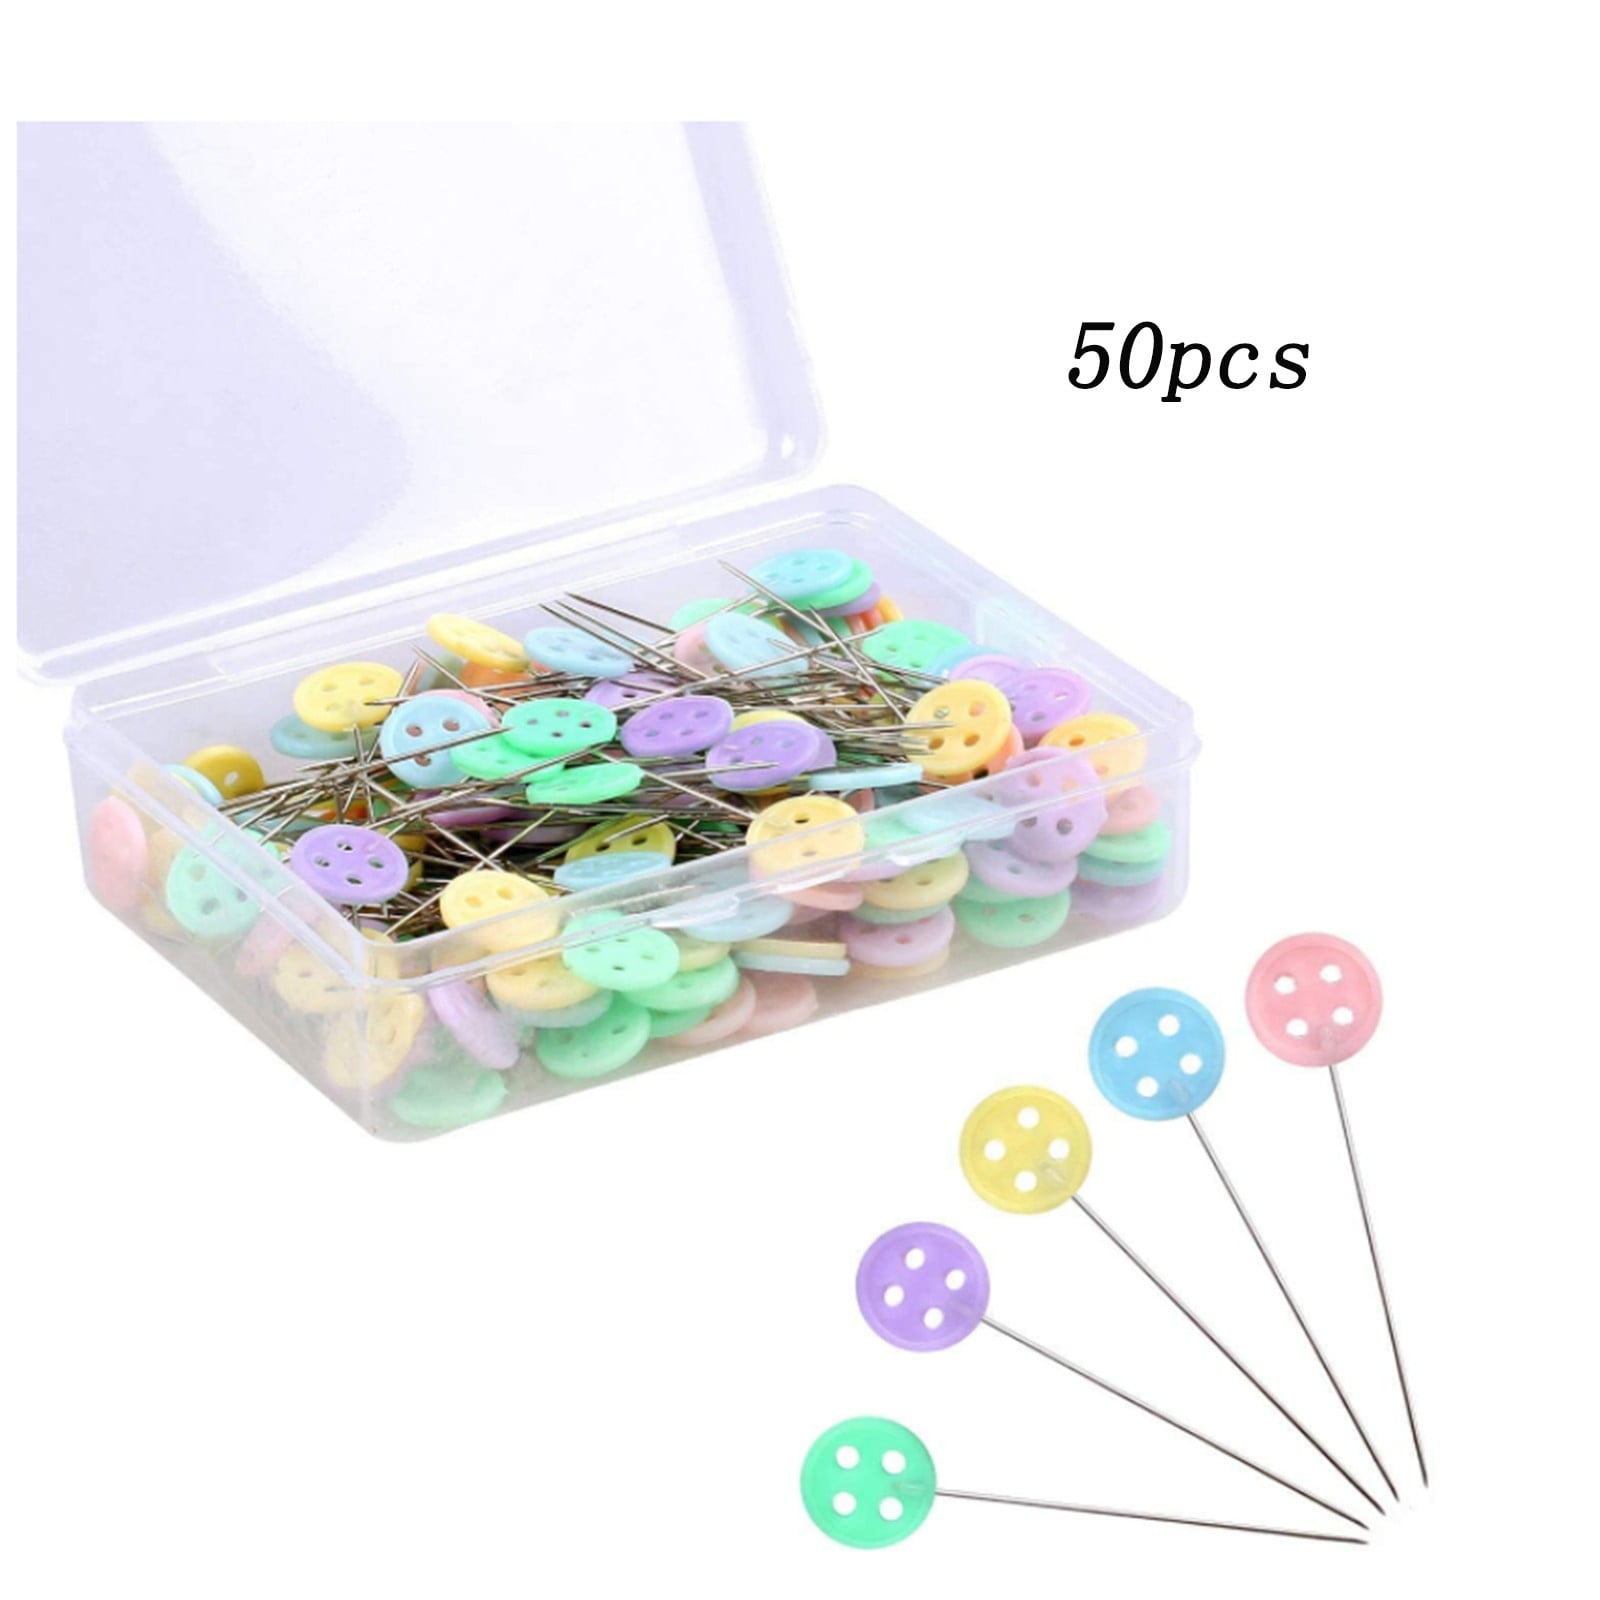 Apmemiss Wholesale 50 PCS Flat Head Pins Sewing Pins for Fabric Button ...